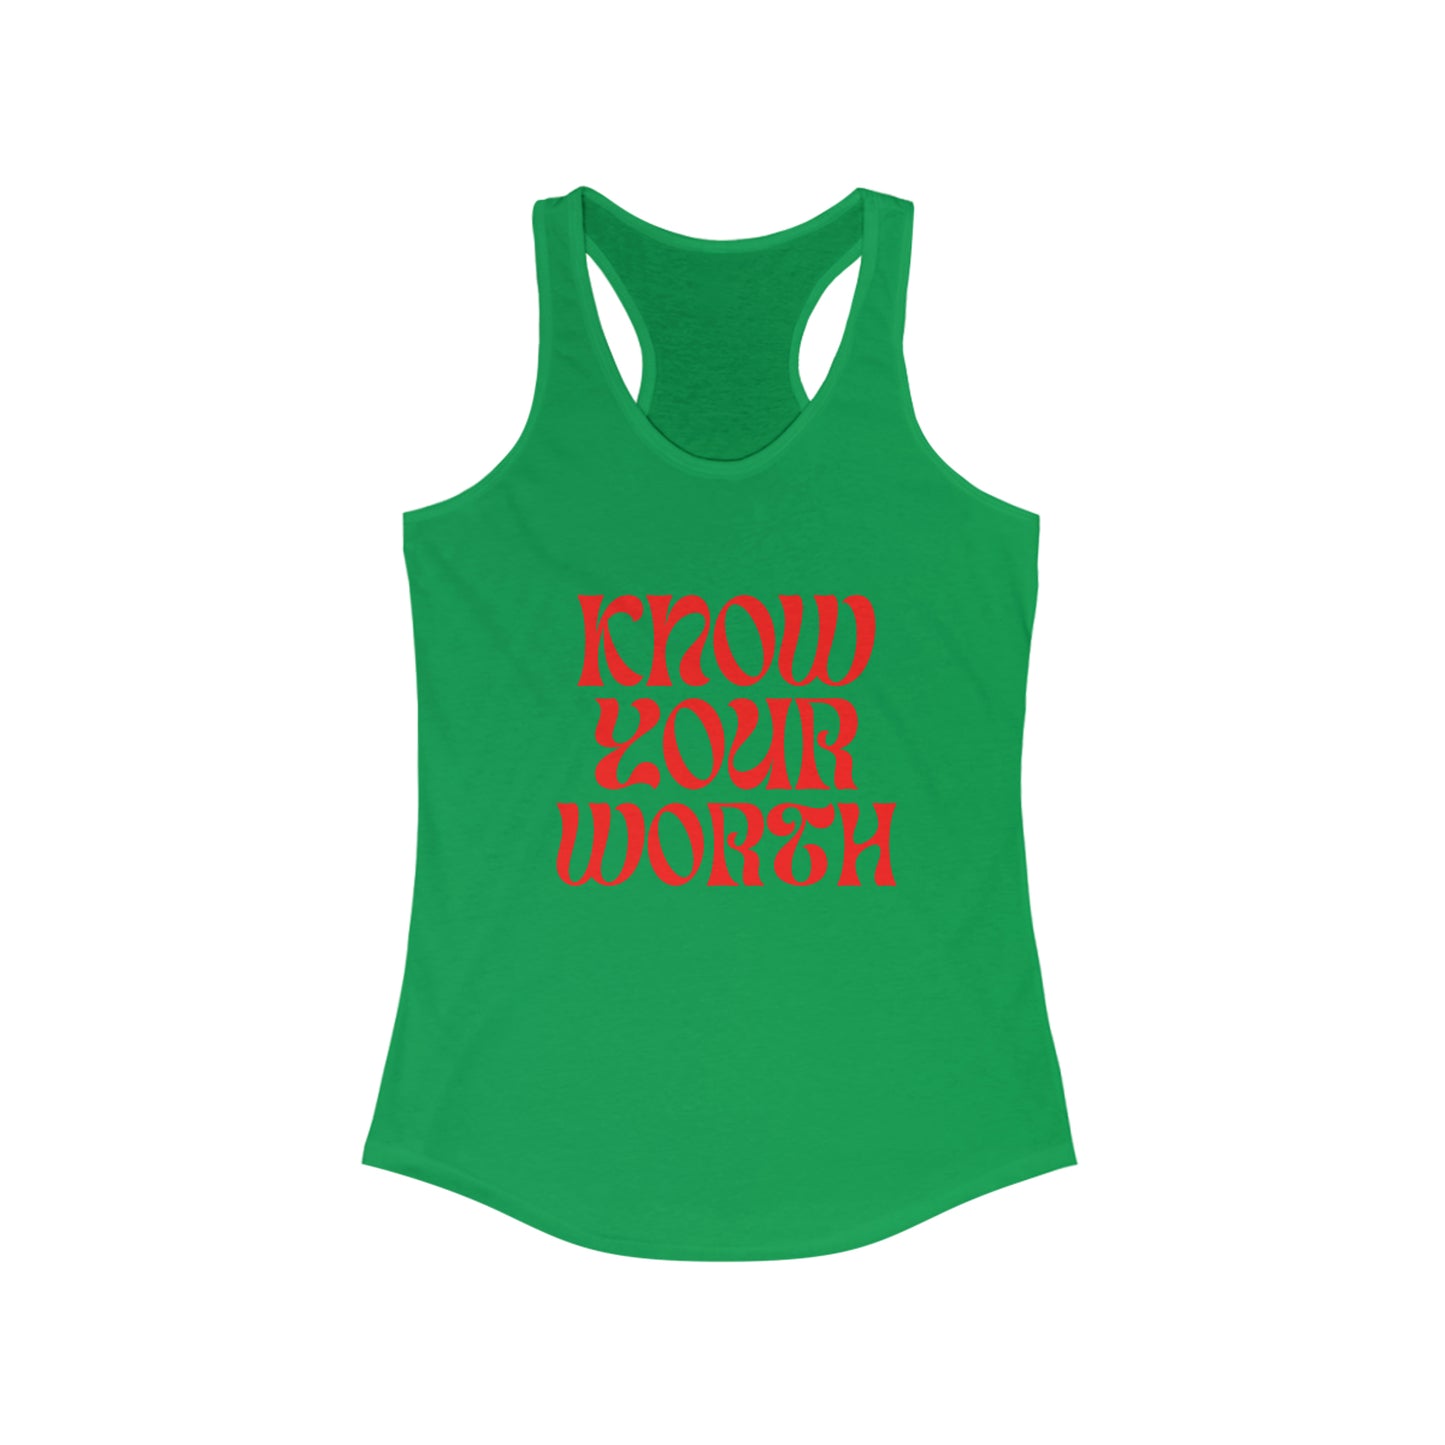 Know your Worth Racerback Tank